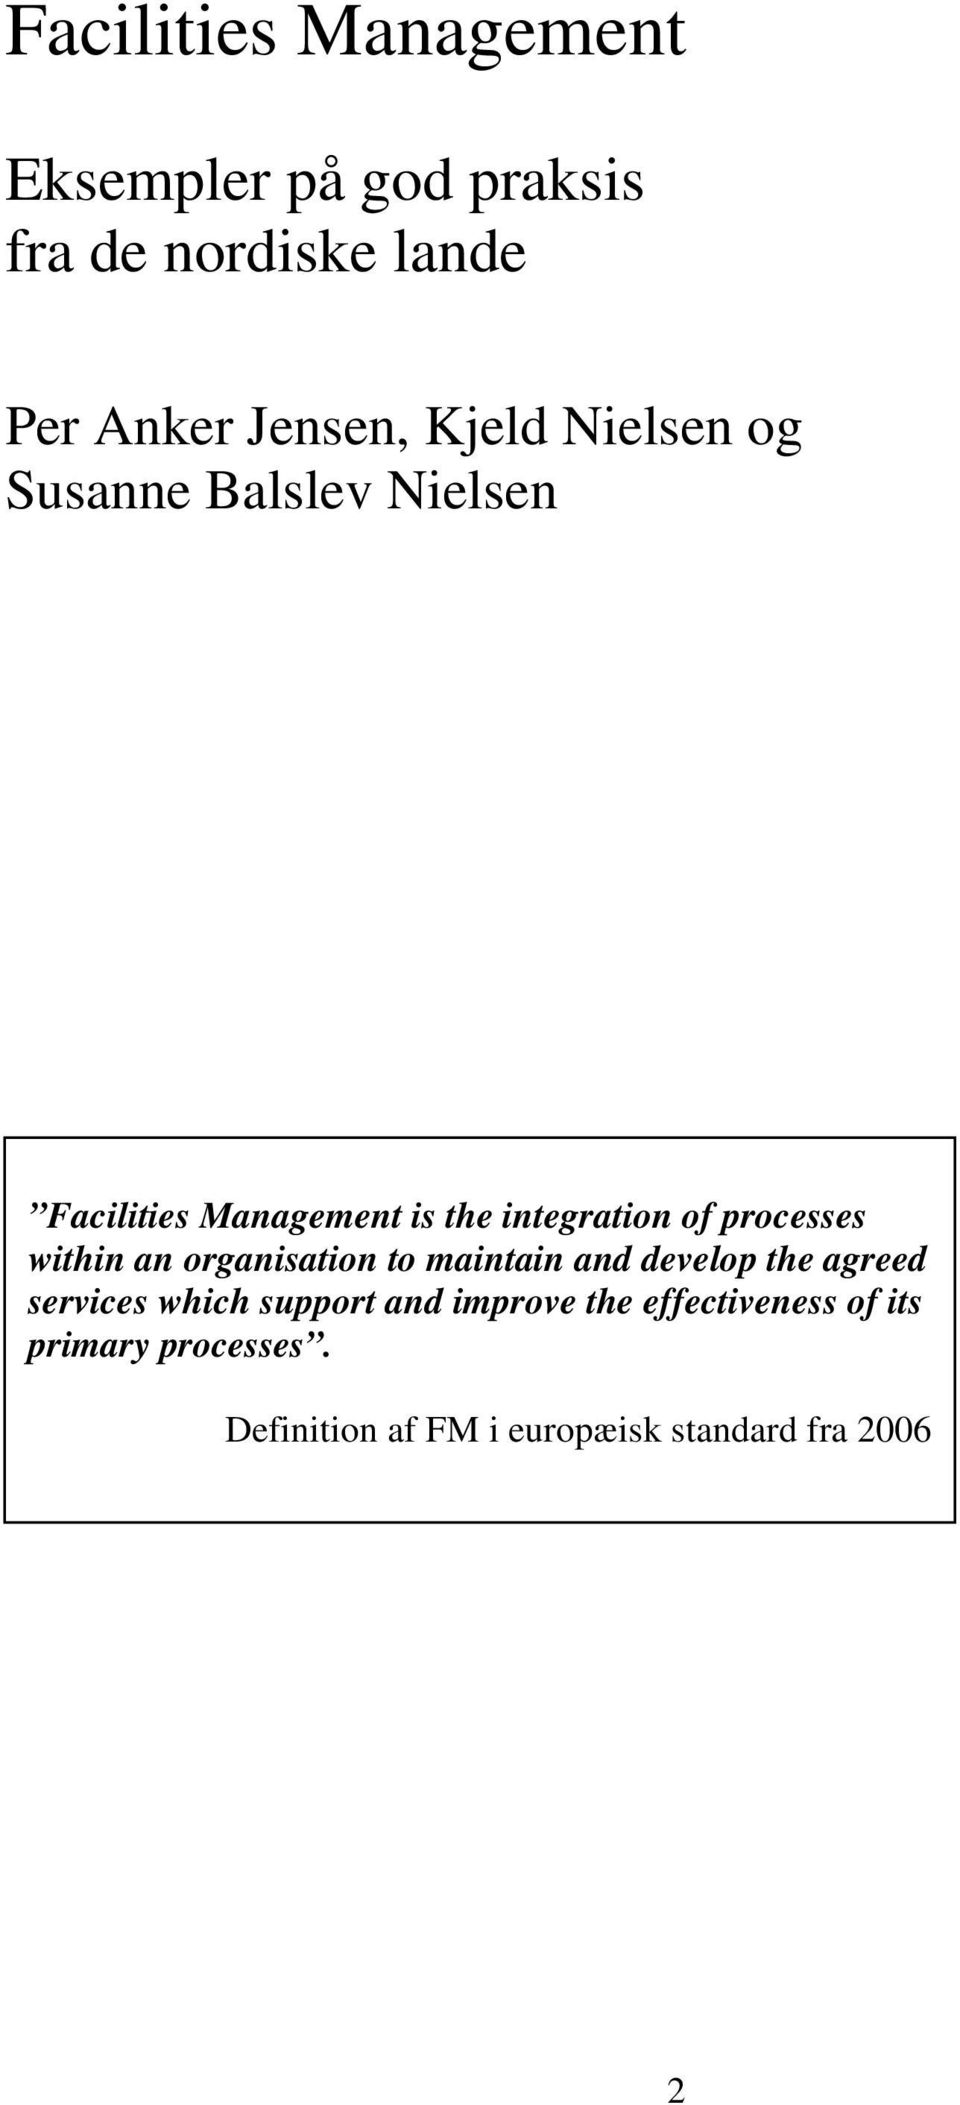 processes within an organisation to maintain and develop the agreed services which support